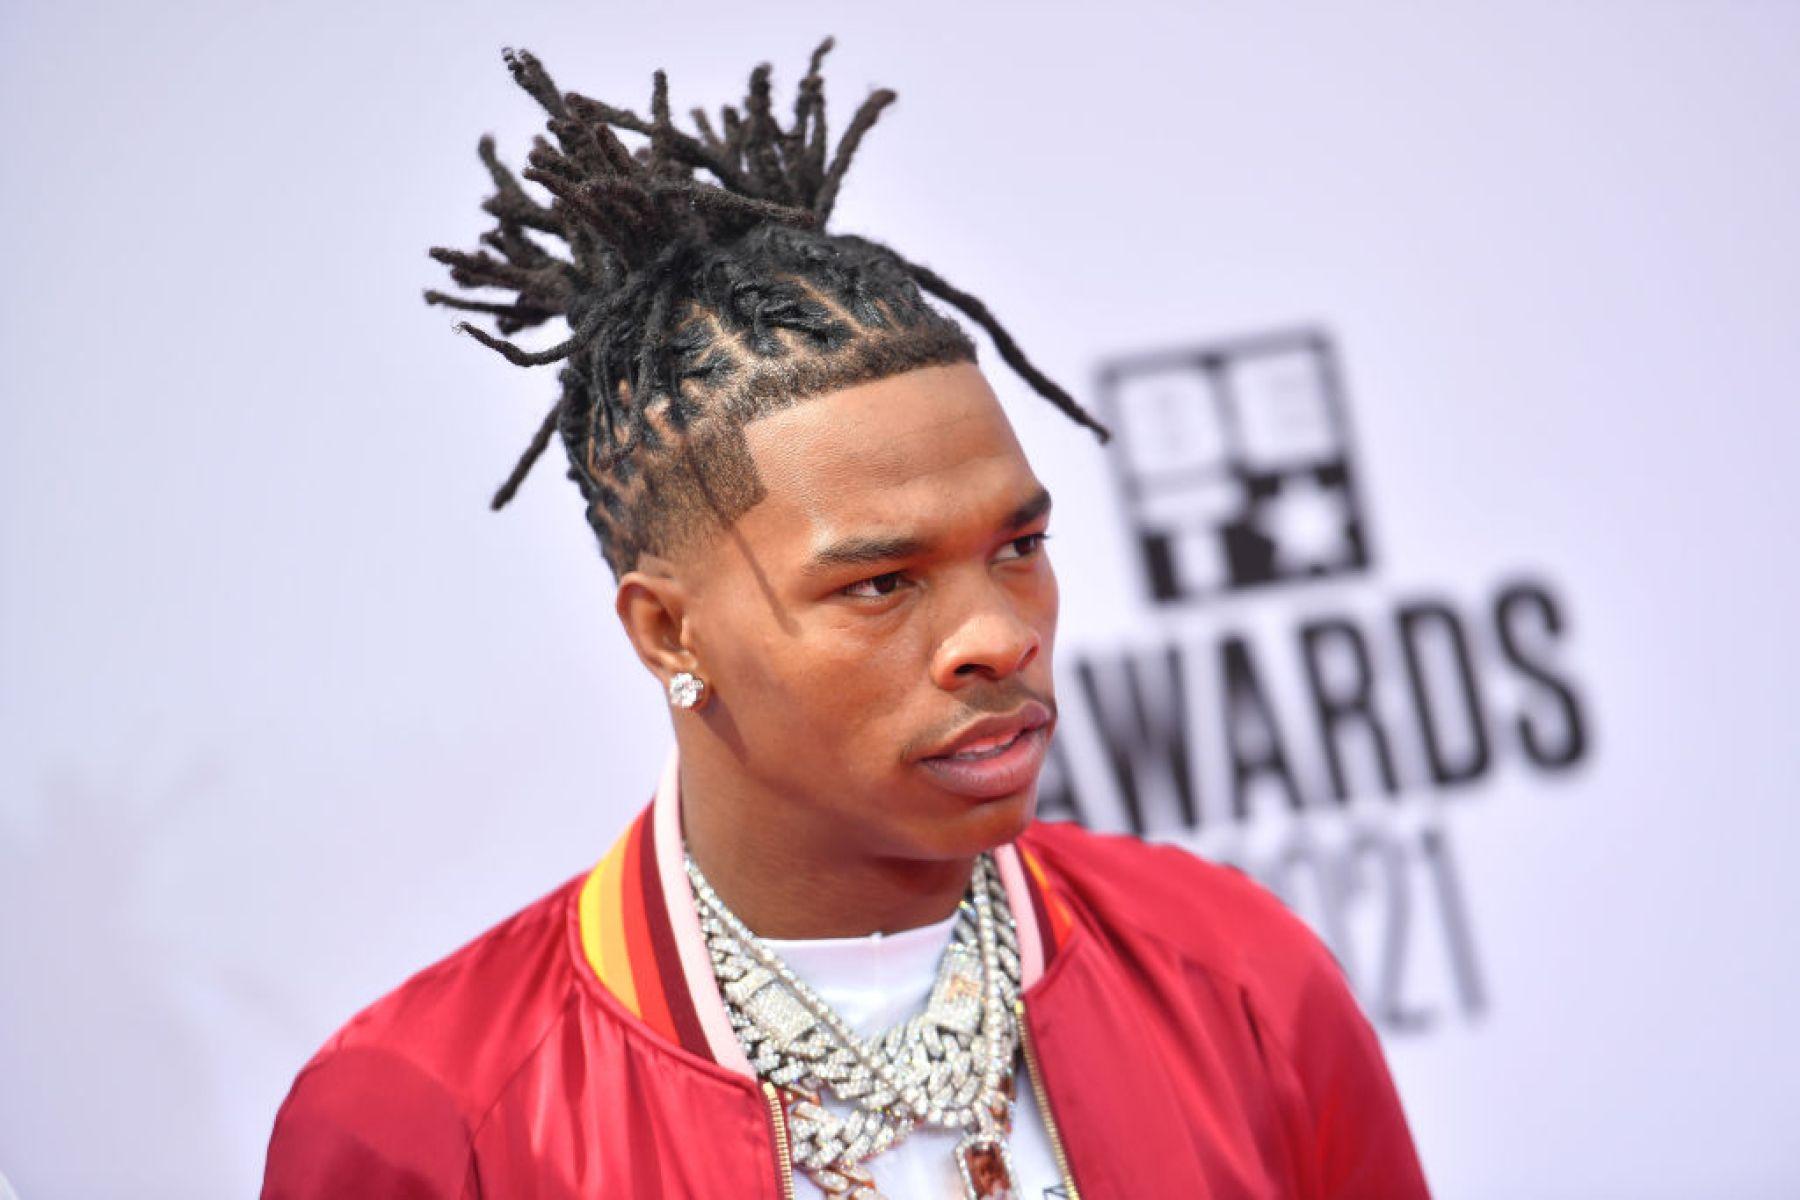 Lil Baby Net Worth A Preview at the Young Rapper’s Life, Career, and